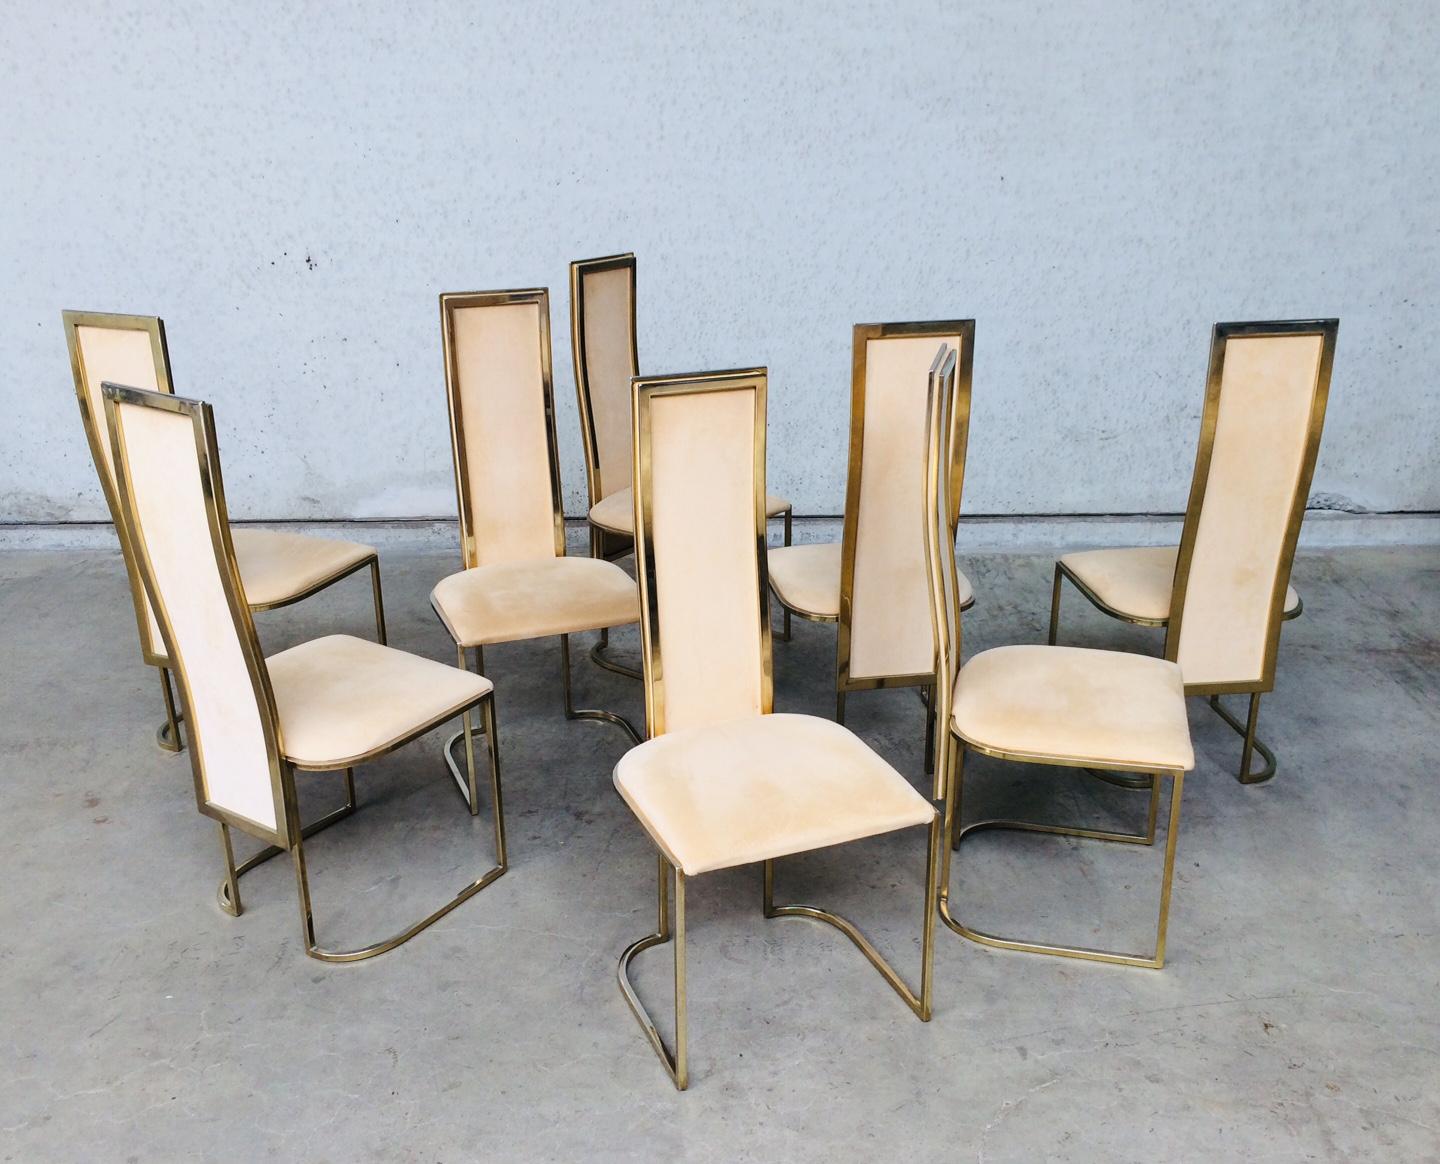 Belgian Hollywood Regency Design Set of 8 Dining Chairs by Belgo Chrom, 1970's For Sale